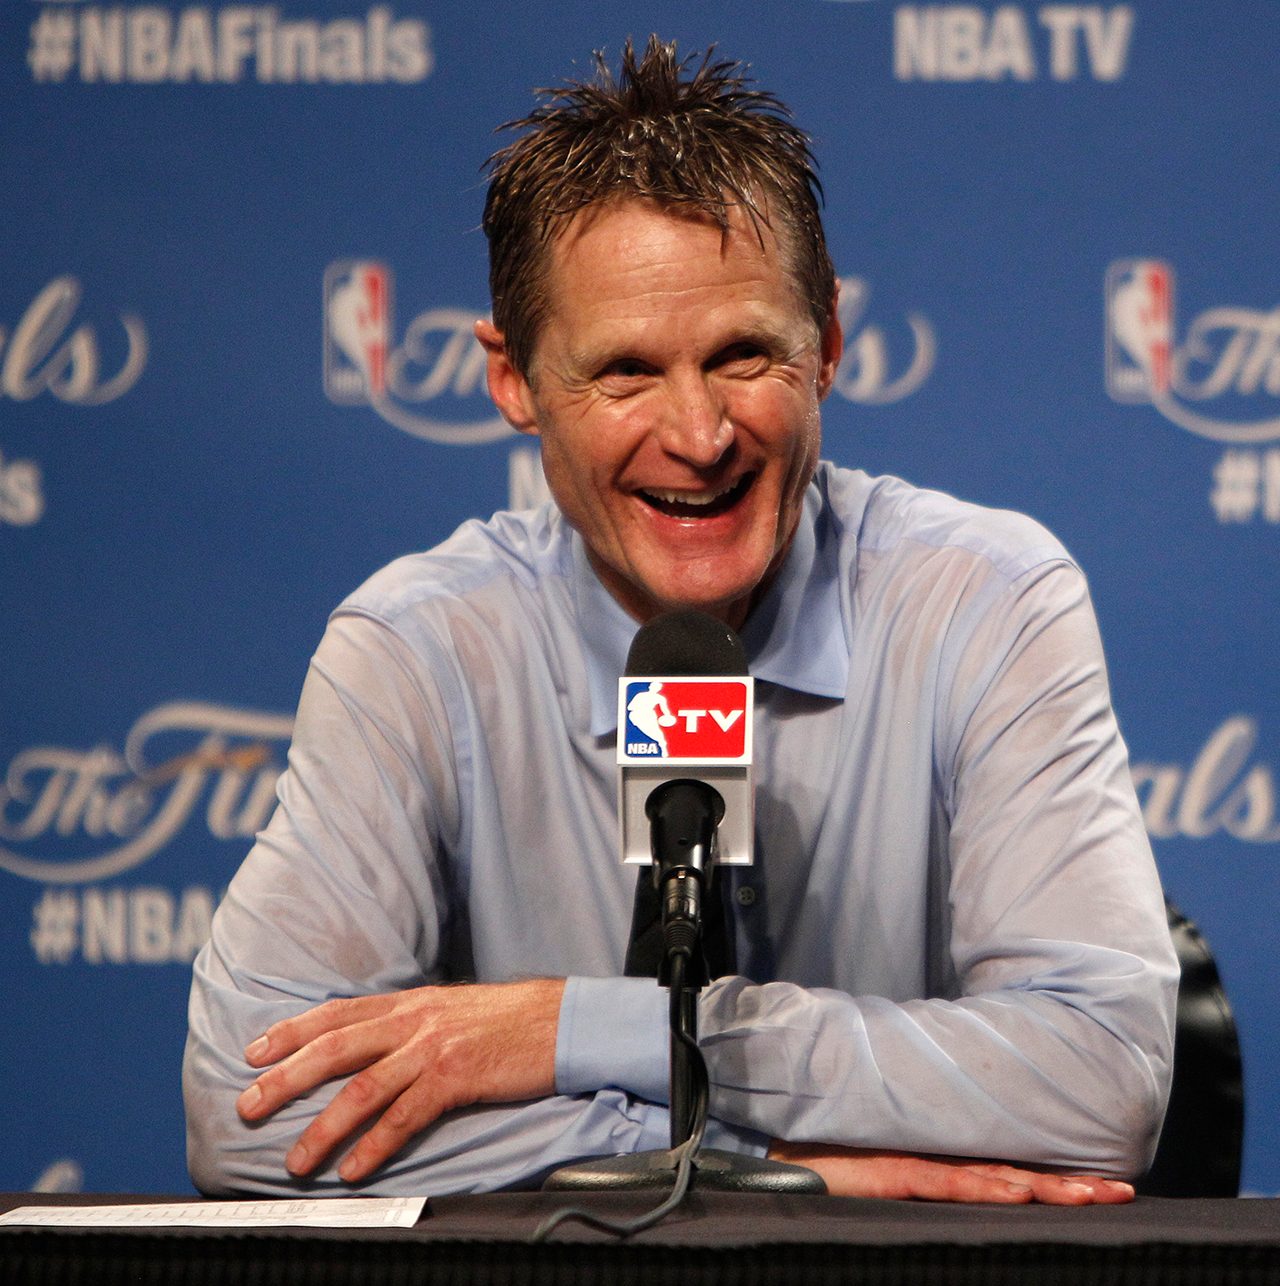 CHAMPION GRIN. Warriors head coach Steve Kerr is drenched and all smiles at the press conference after his team defeated the Cleveland Cavaliers in Game Six of the NBA Finals. Photo by DAVID MAXWELL/EPA 